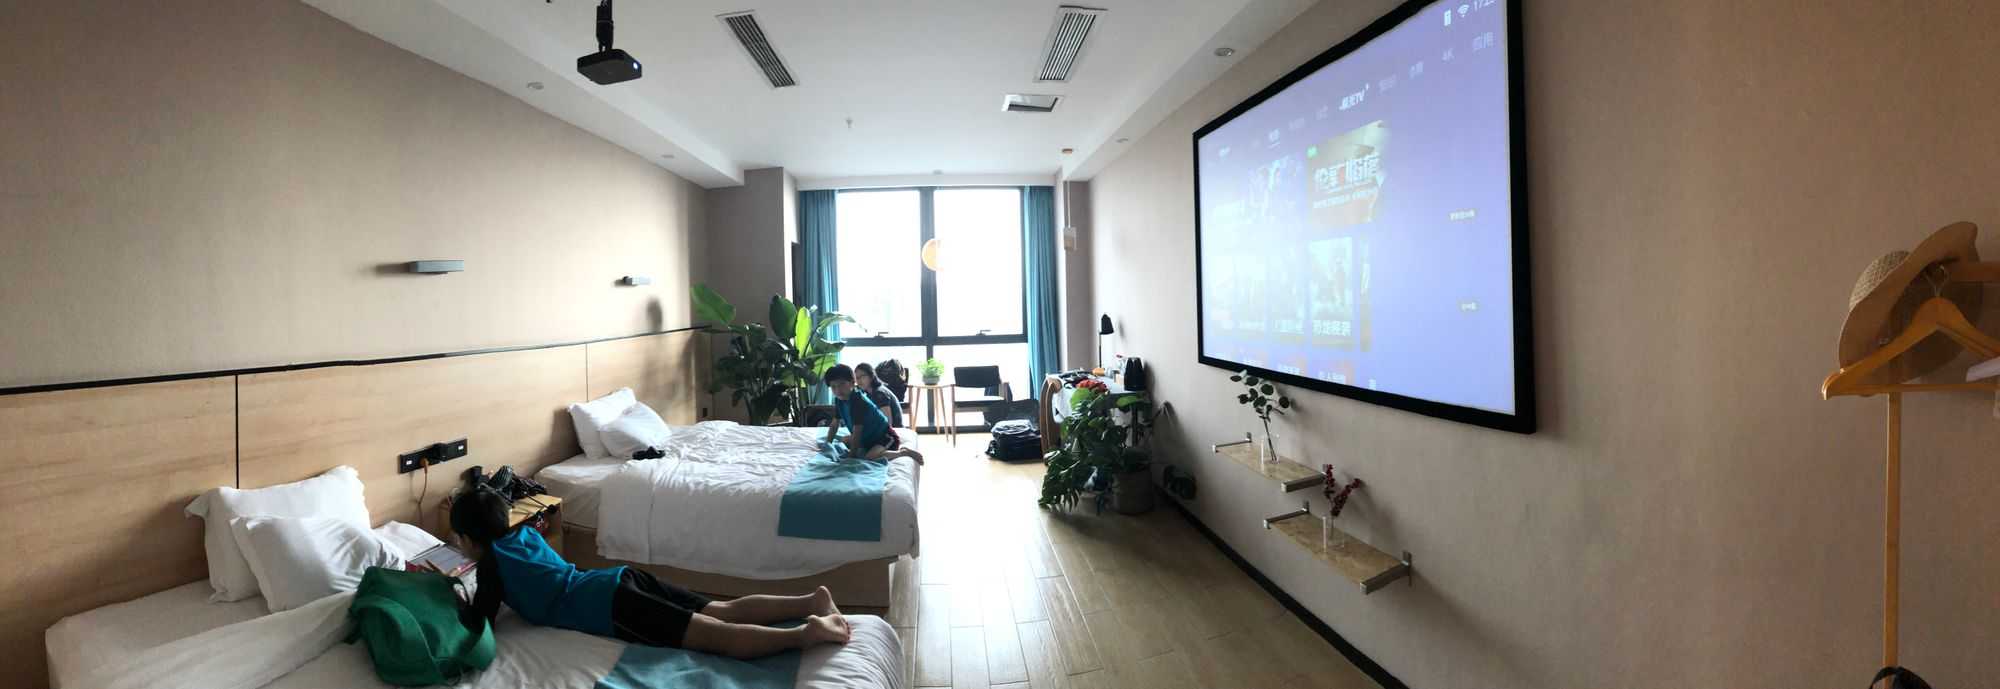 Hotel room in Chongqing (Image by author)